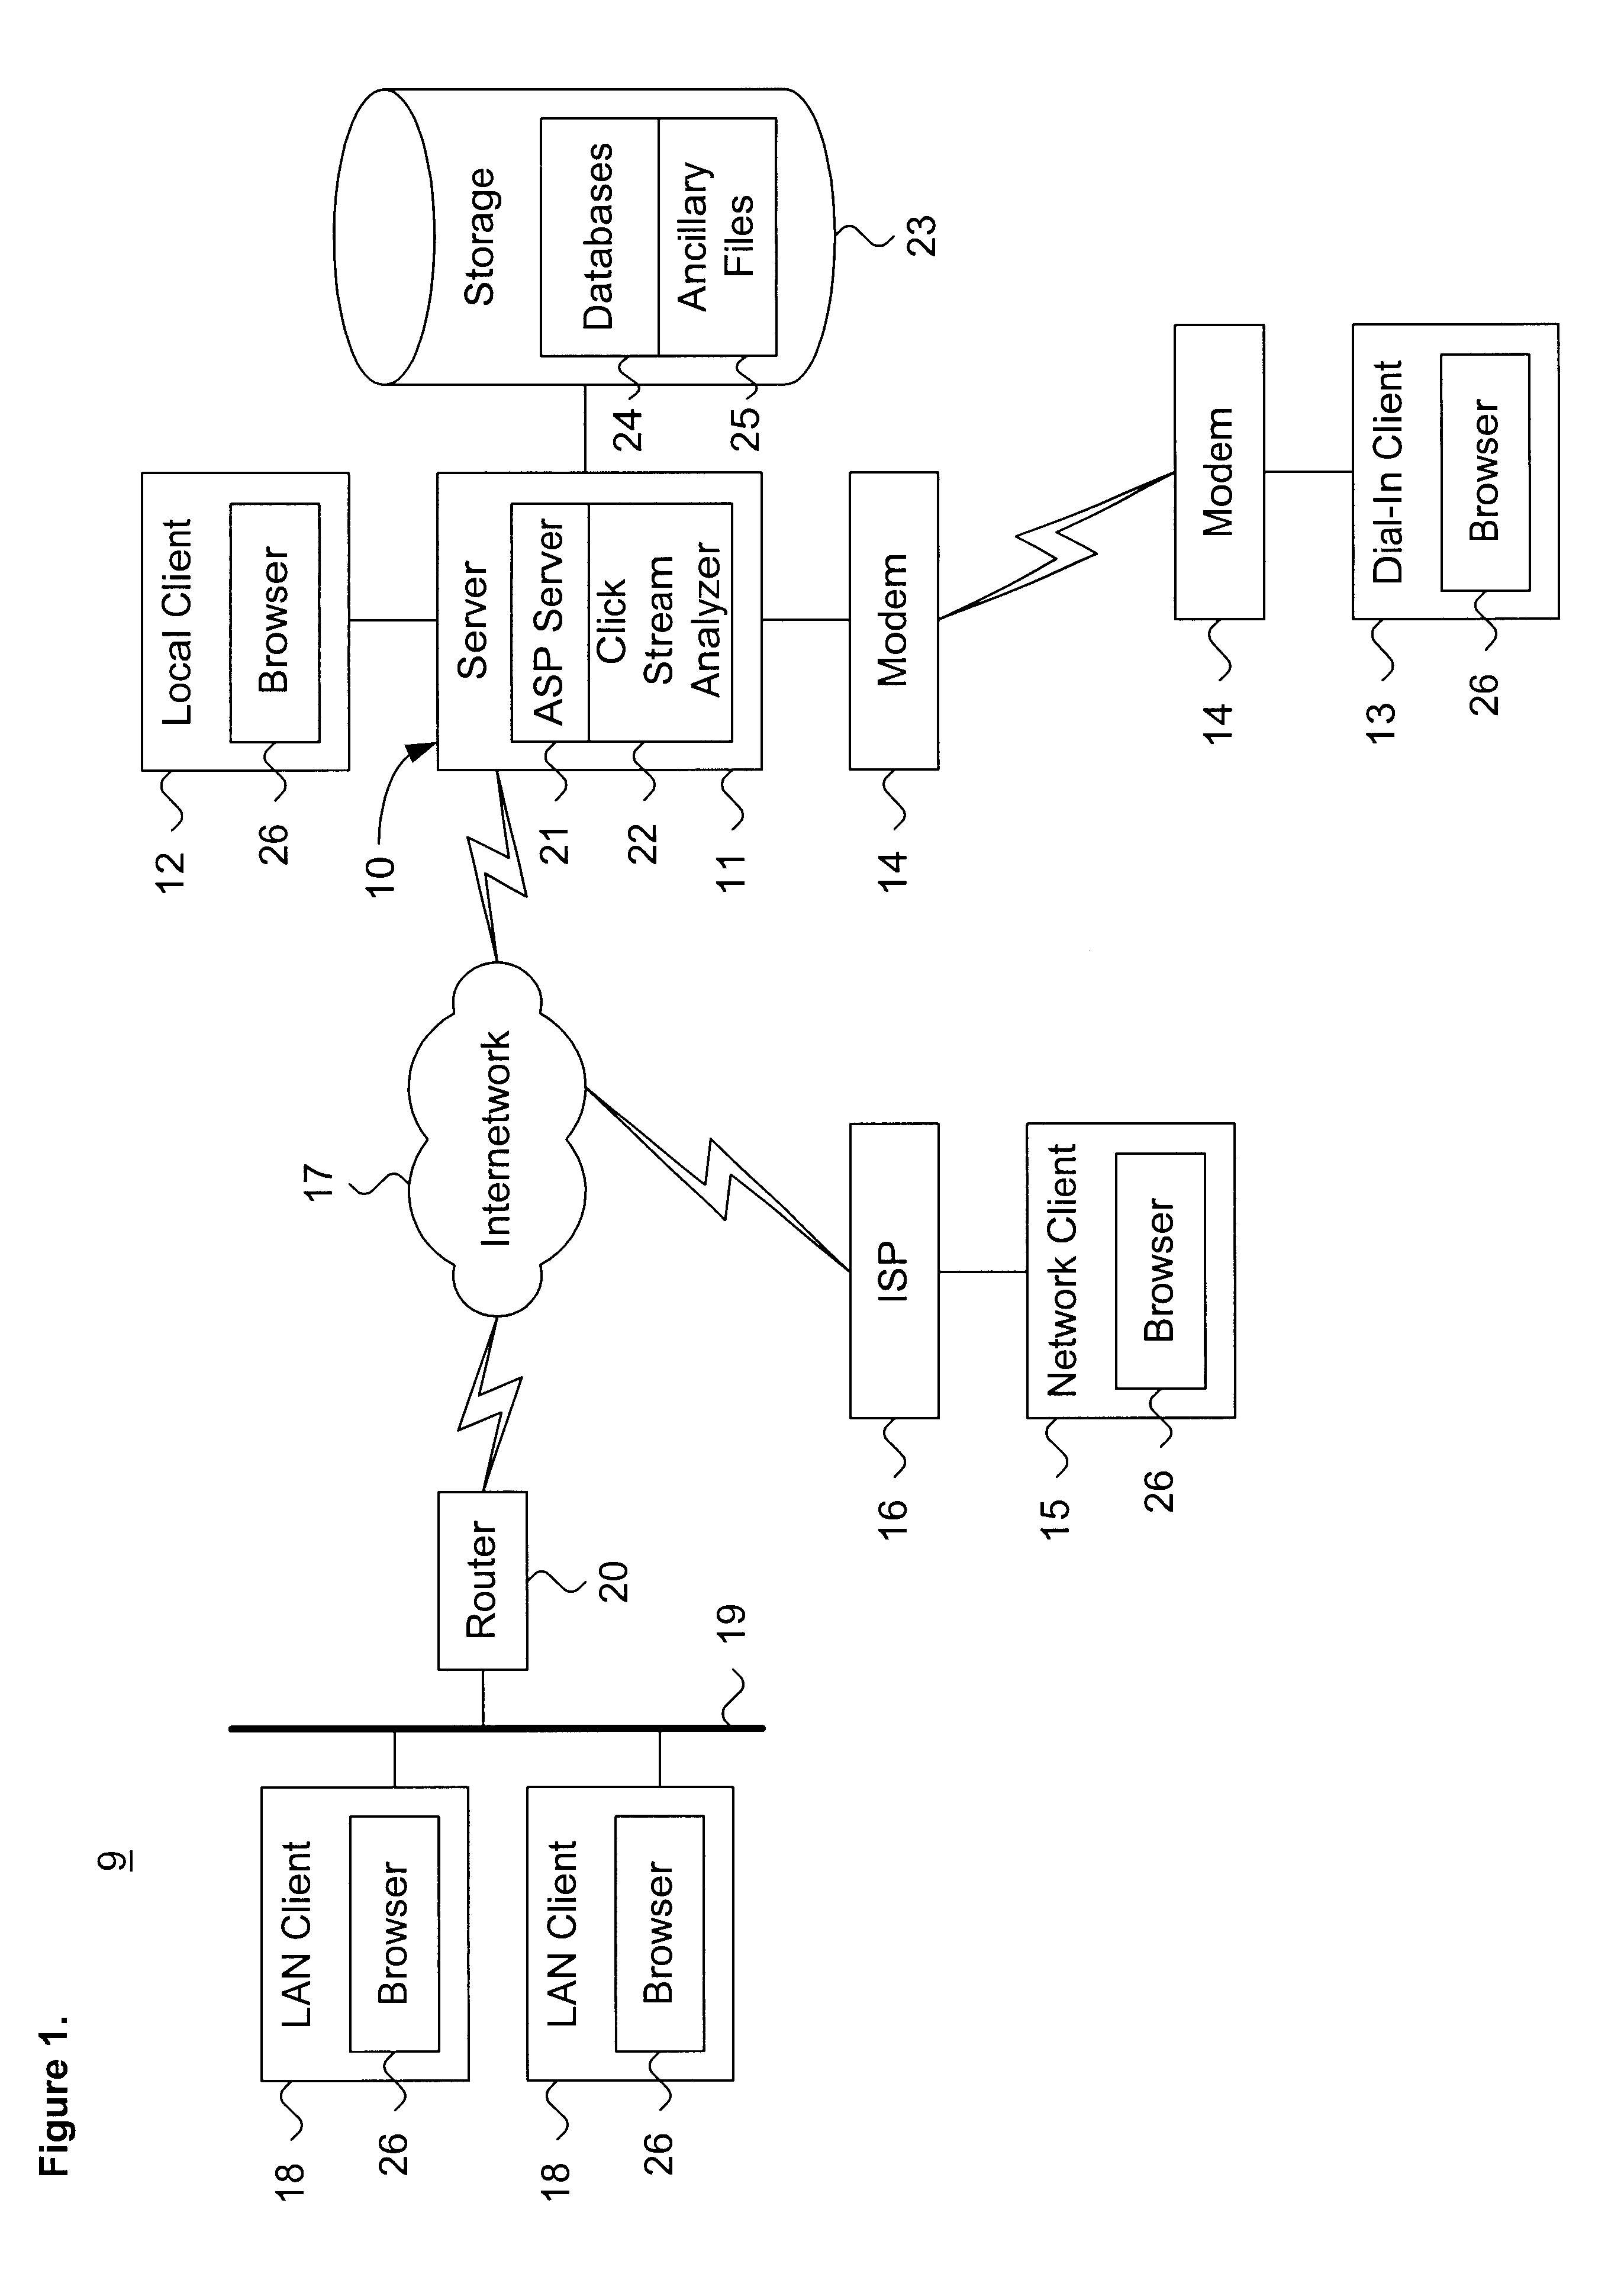 System and method for dynamically evaluating an electronic commerce business model through click stream analysis